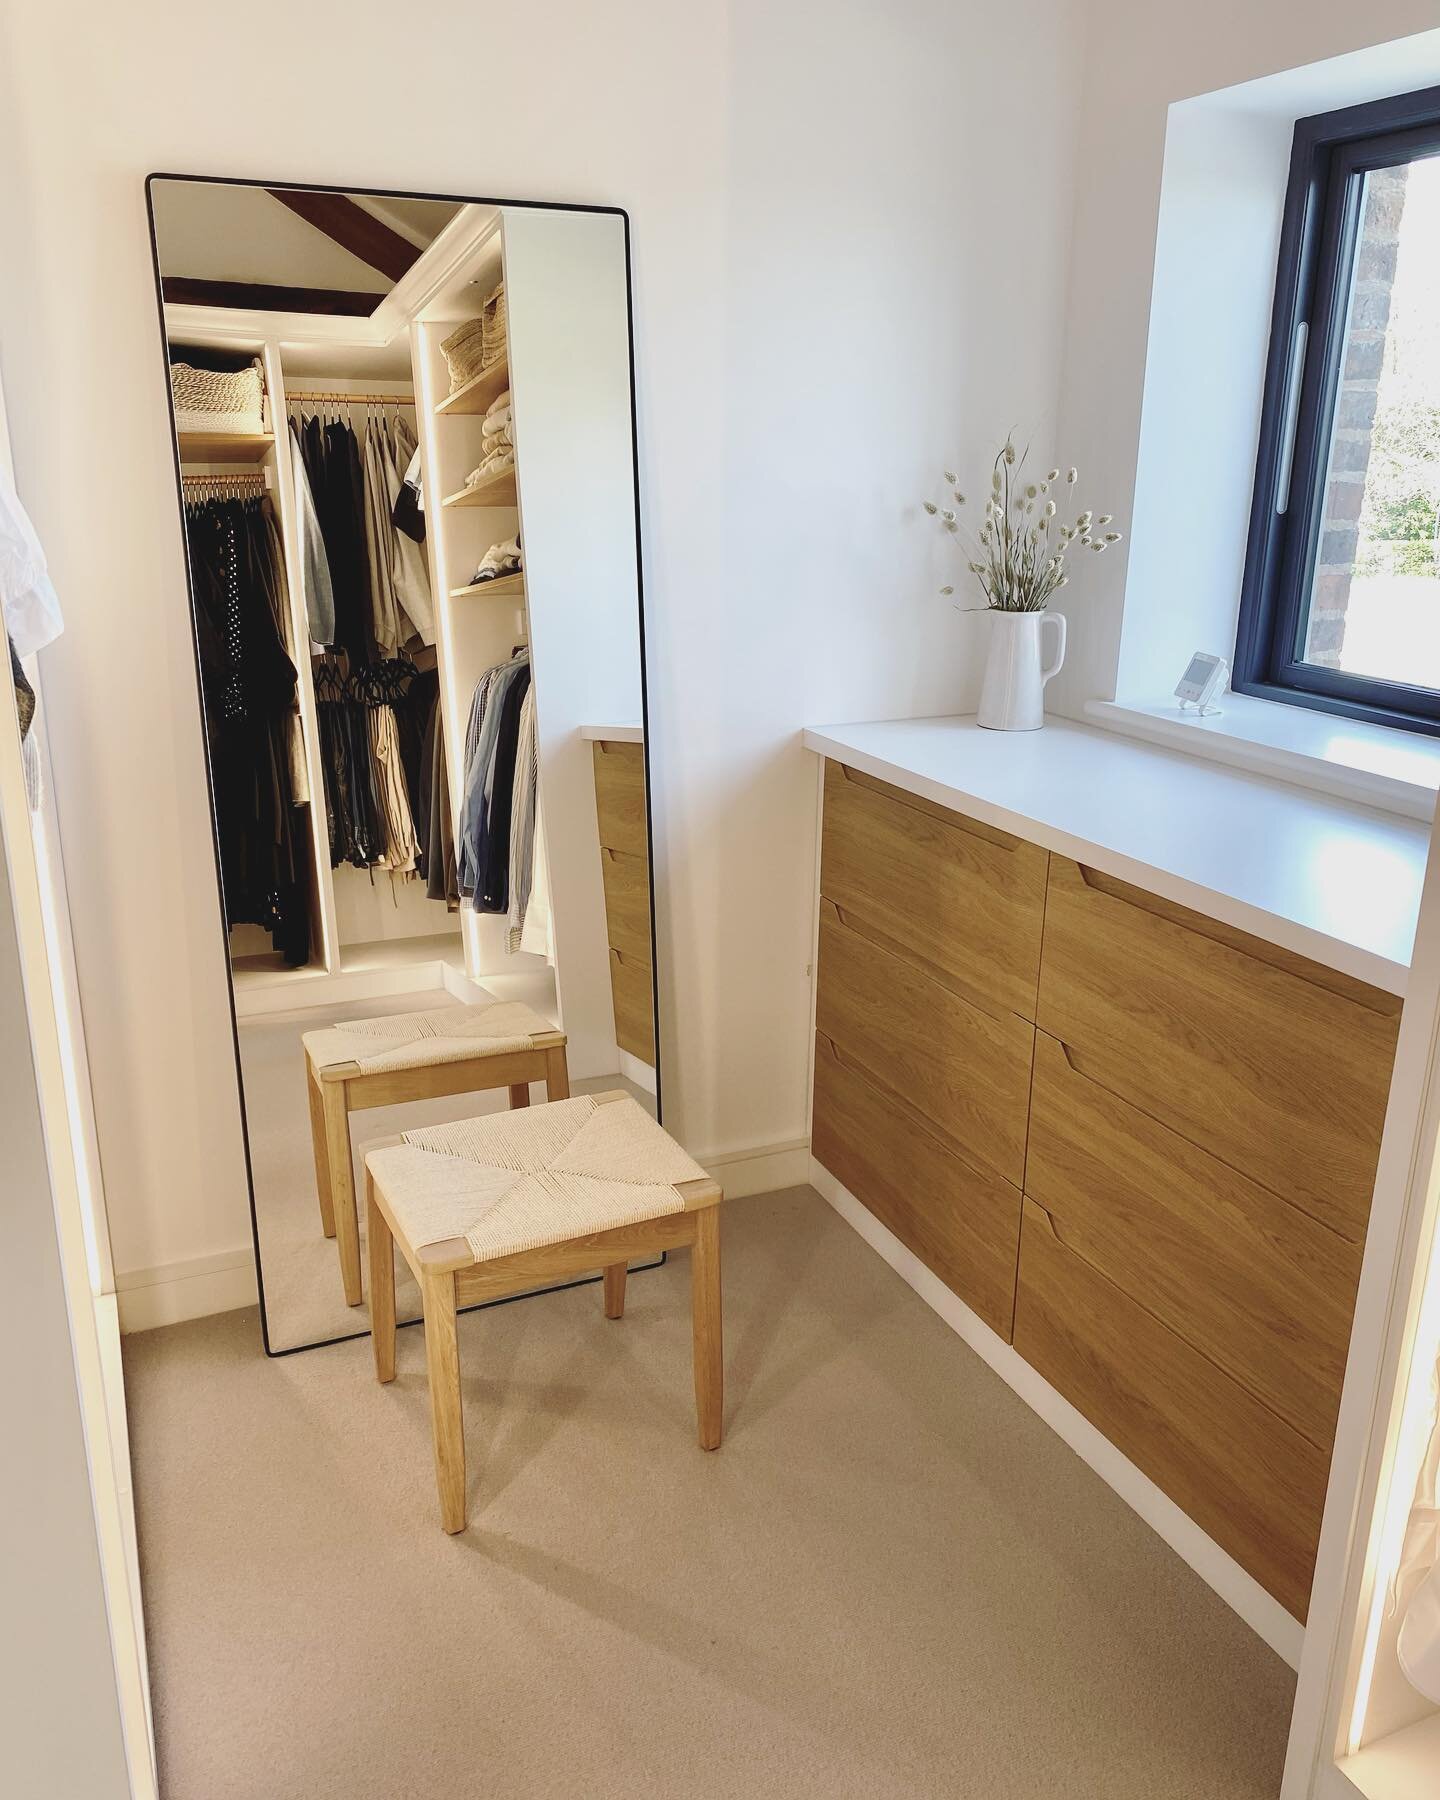 We were thrilled to return and view this stylish dressing room. With clean lines and clever natural accents for storage, it&rsquo;s the perfect calm space.